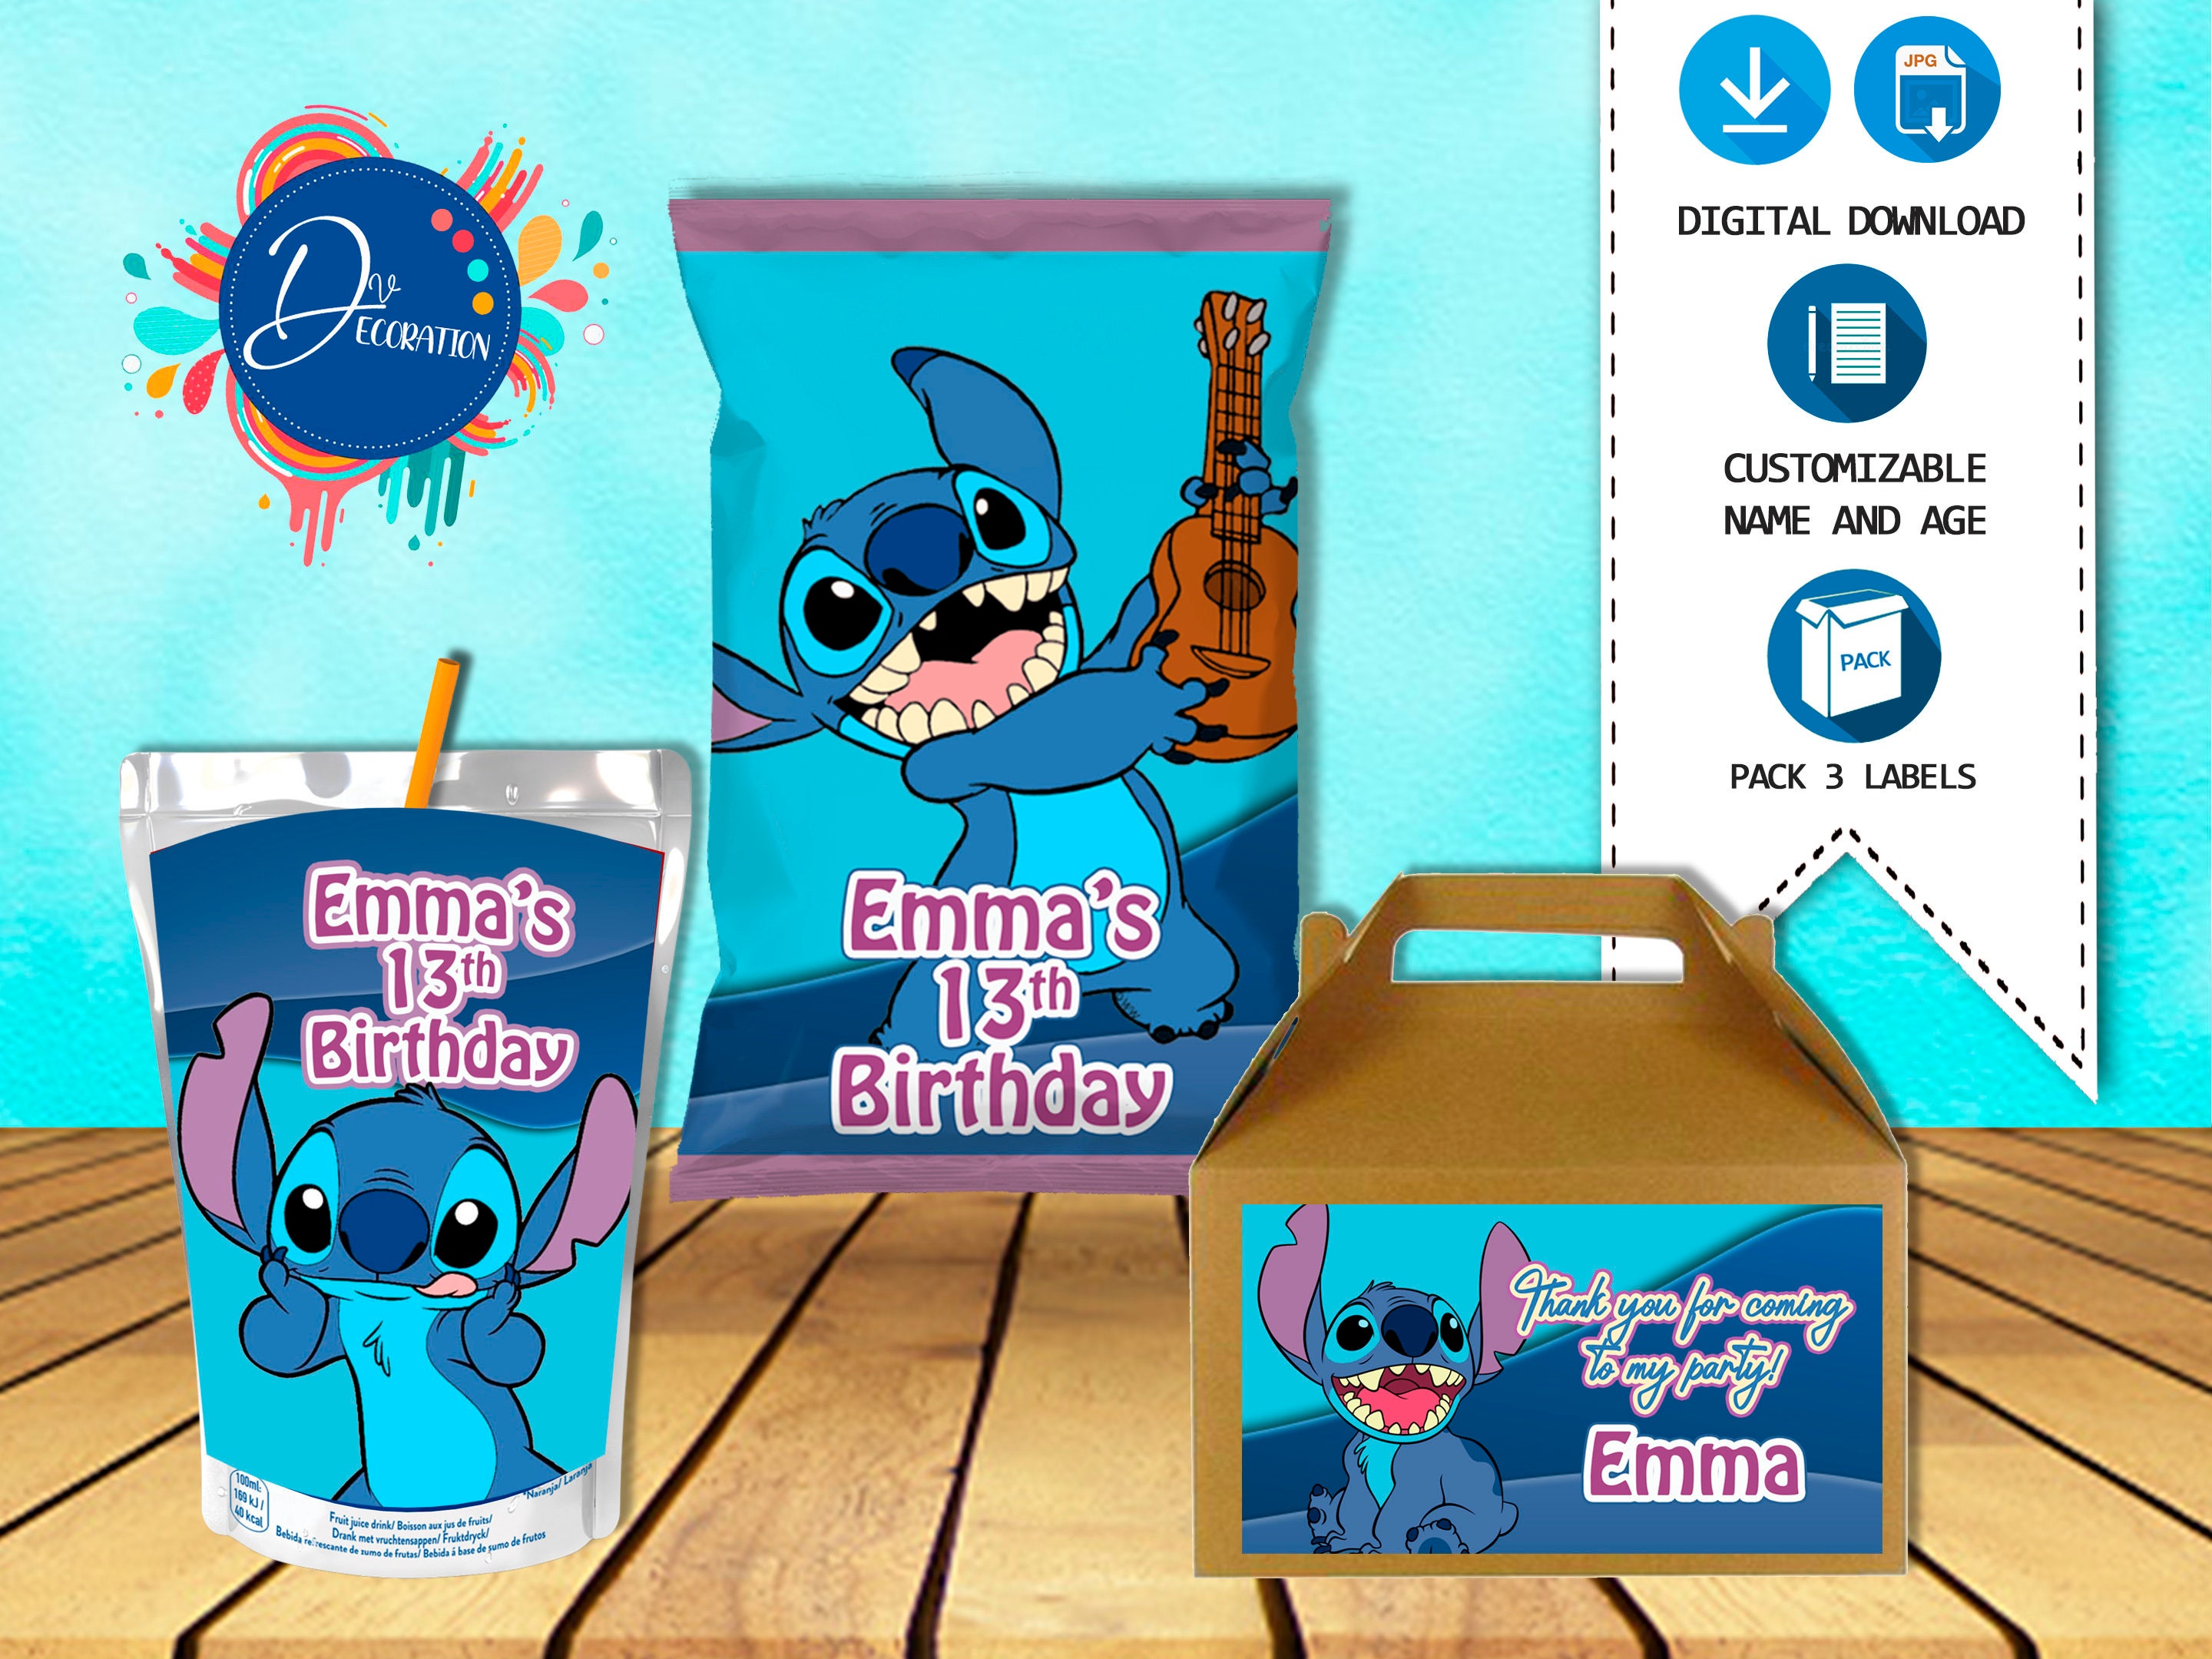 Stitch Pack 3 Labels for Birthday Party Printable DIGITAL DOWNLOAD